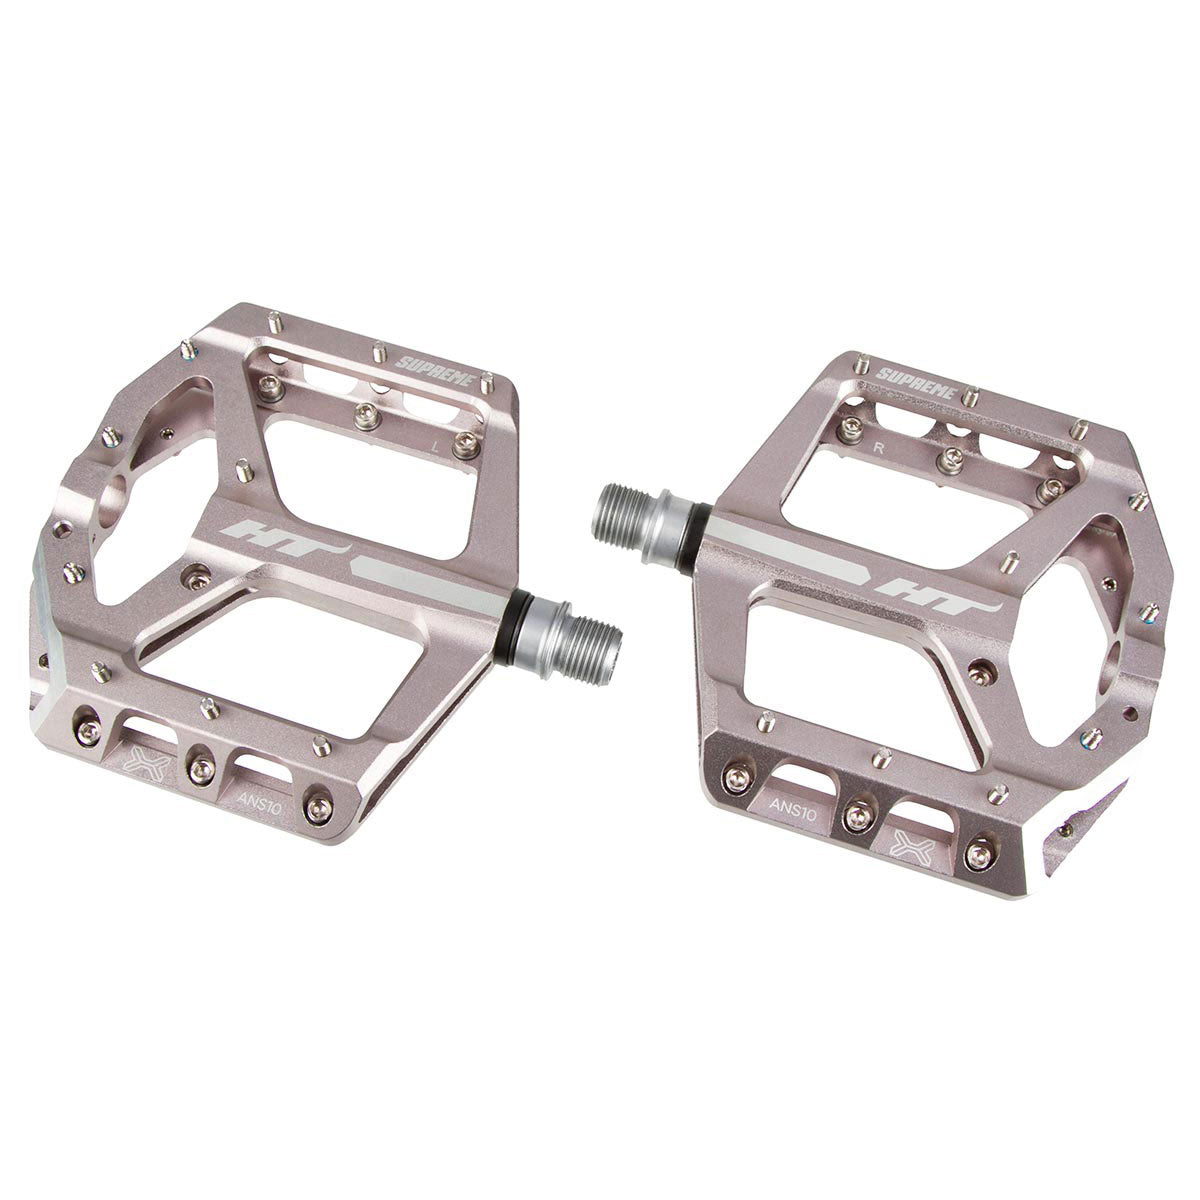 HT ANS10 Supreme Alloy Flat Pedals - Grey